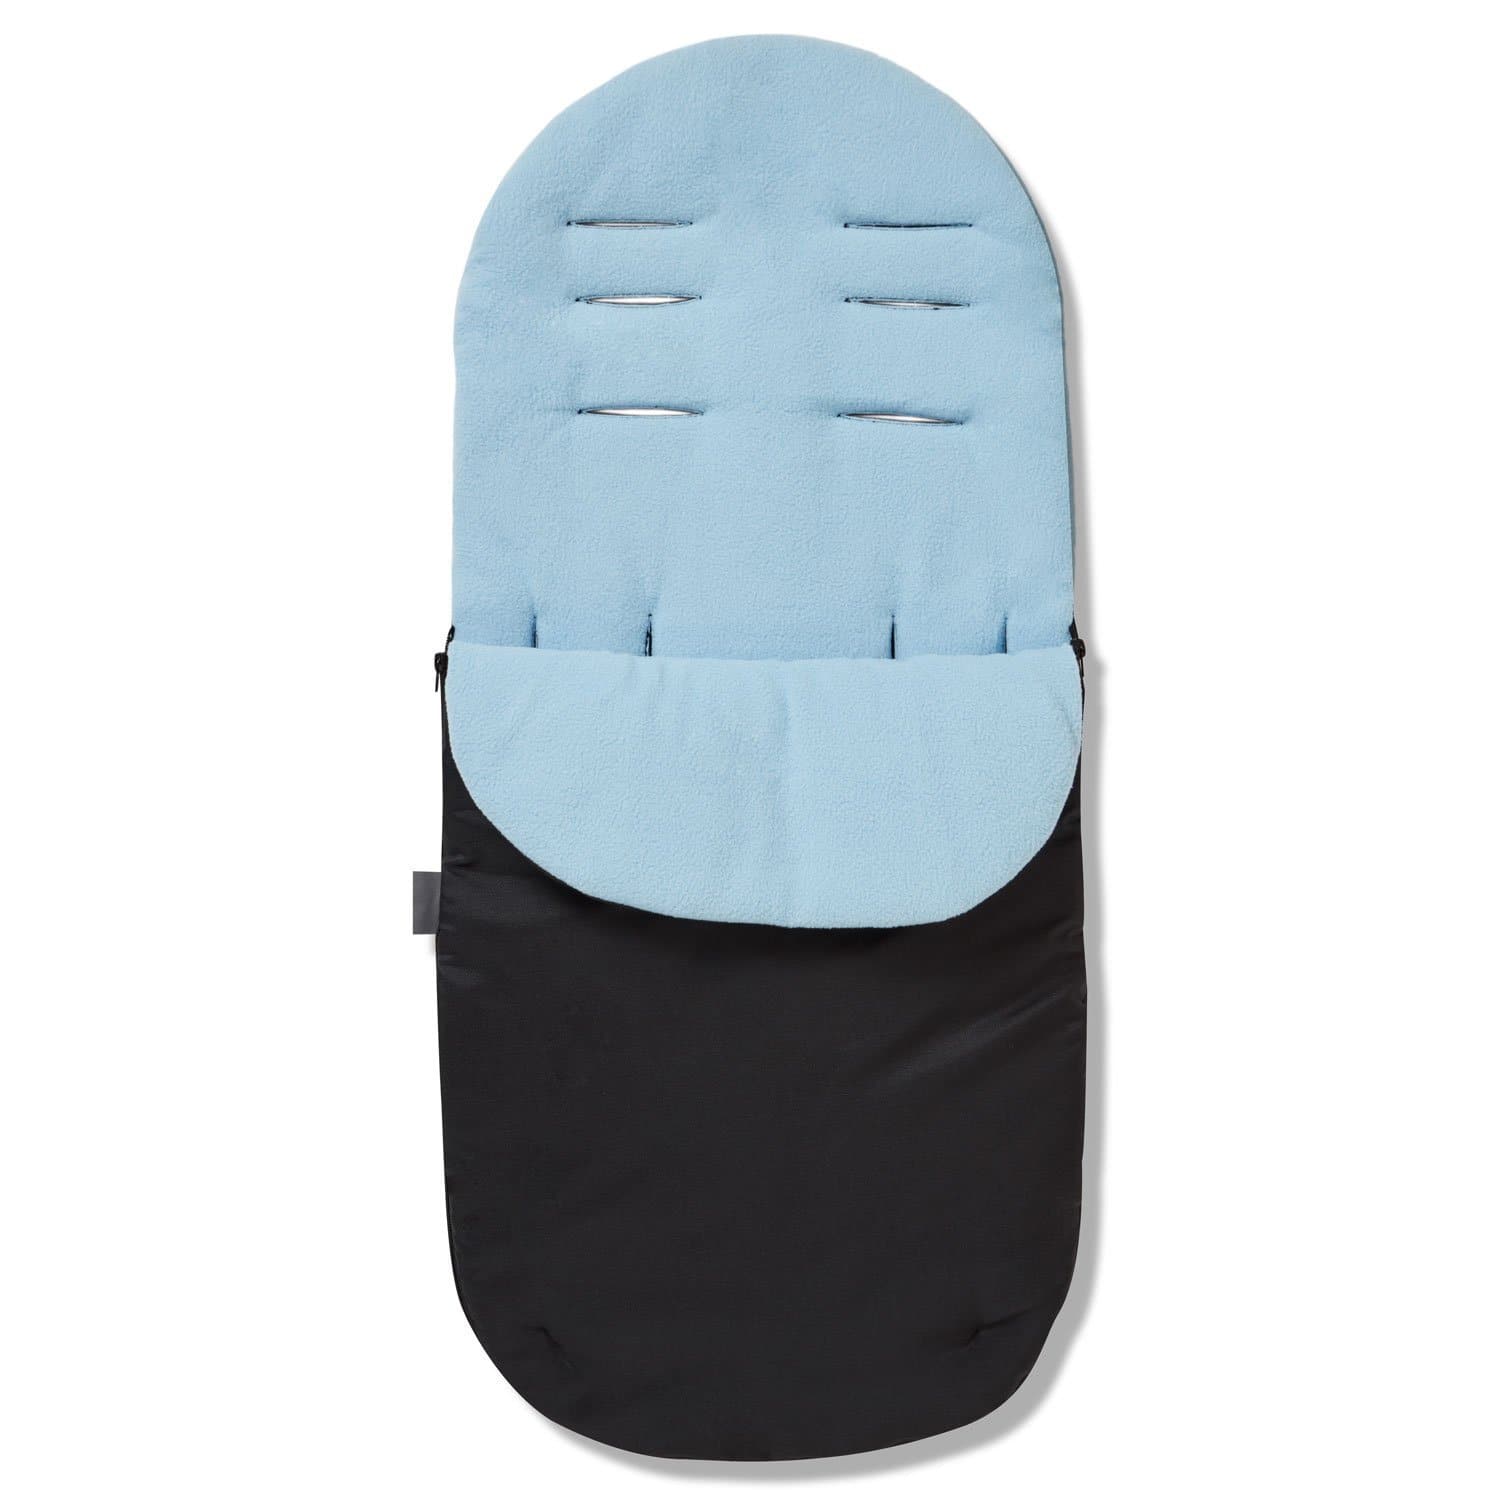 Footmuff / Cosy Toes Compatible with Easywalker - For Your Little One